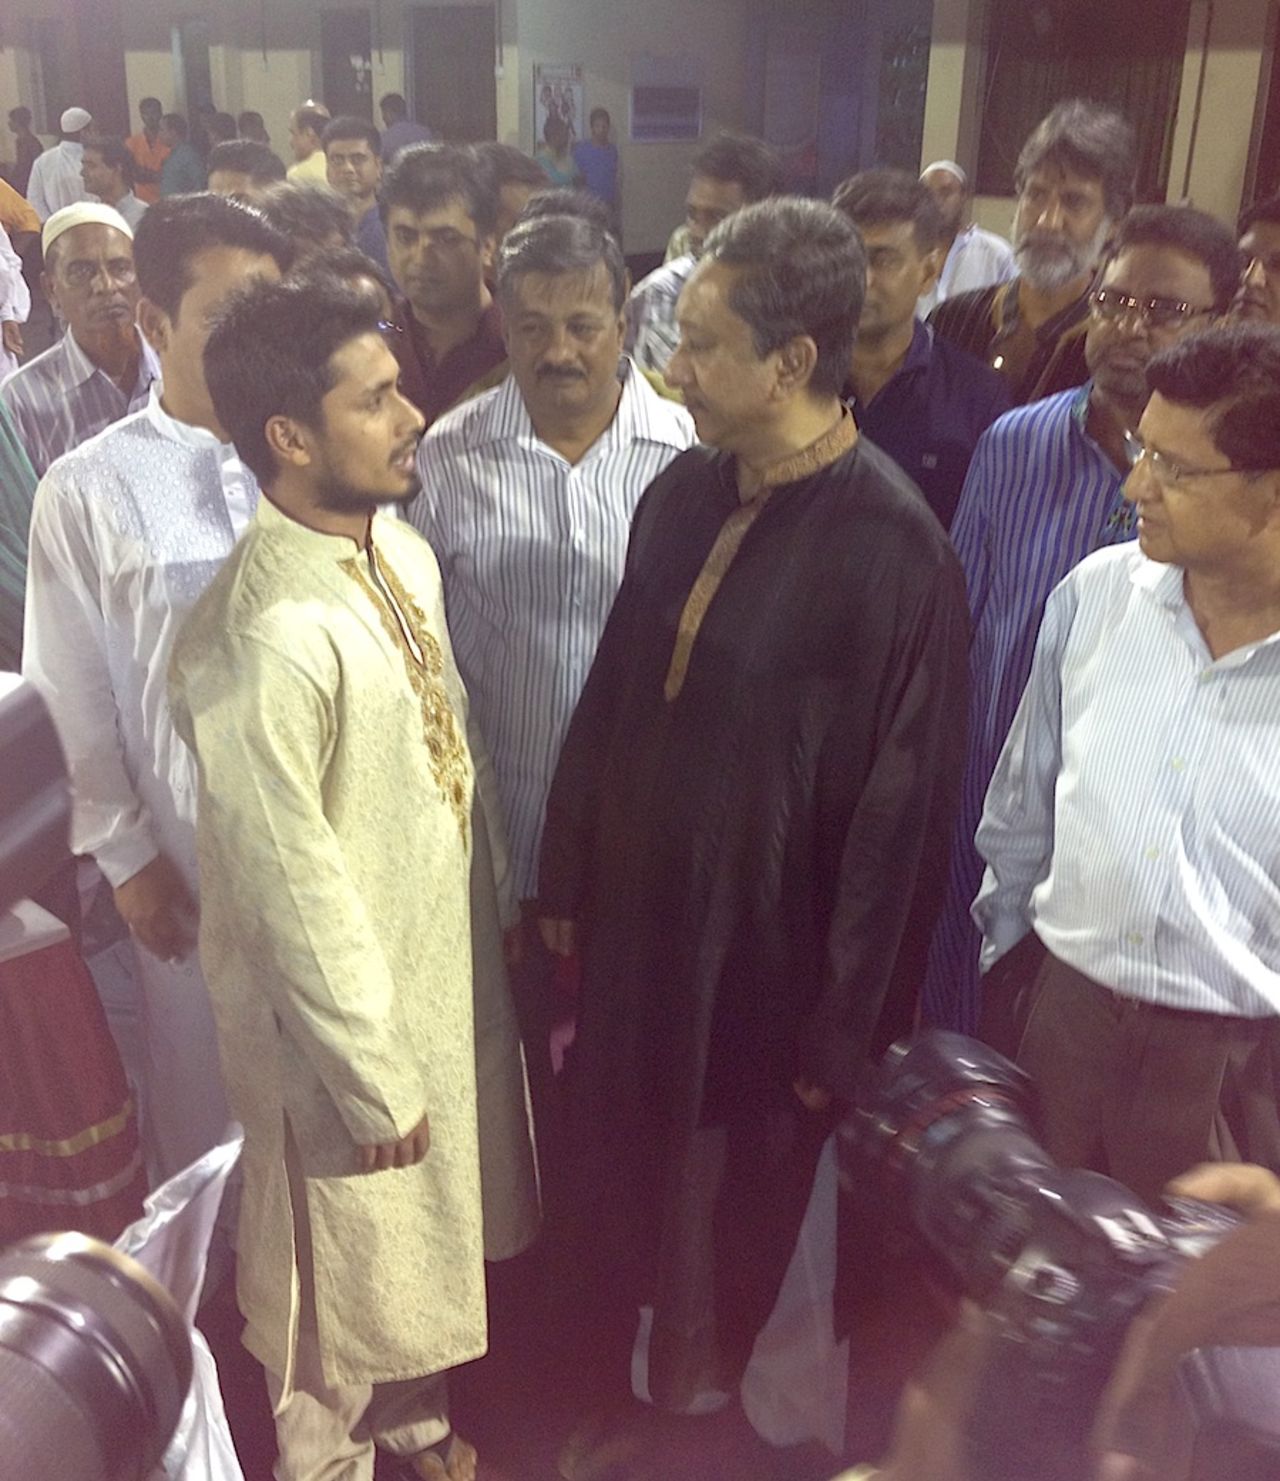 Mohammad Ashraful and BCB president Nazmul Hassan at their first public meeting since the former's confession of his involvement in corruption during the BPL this year, Dhaka, August 6, 2013